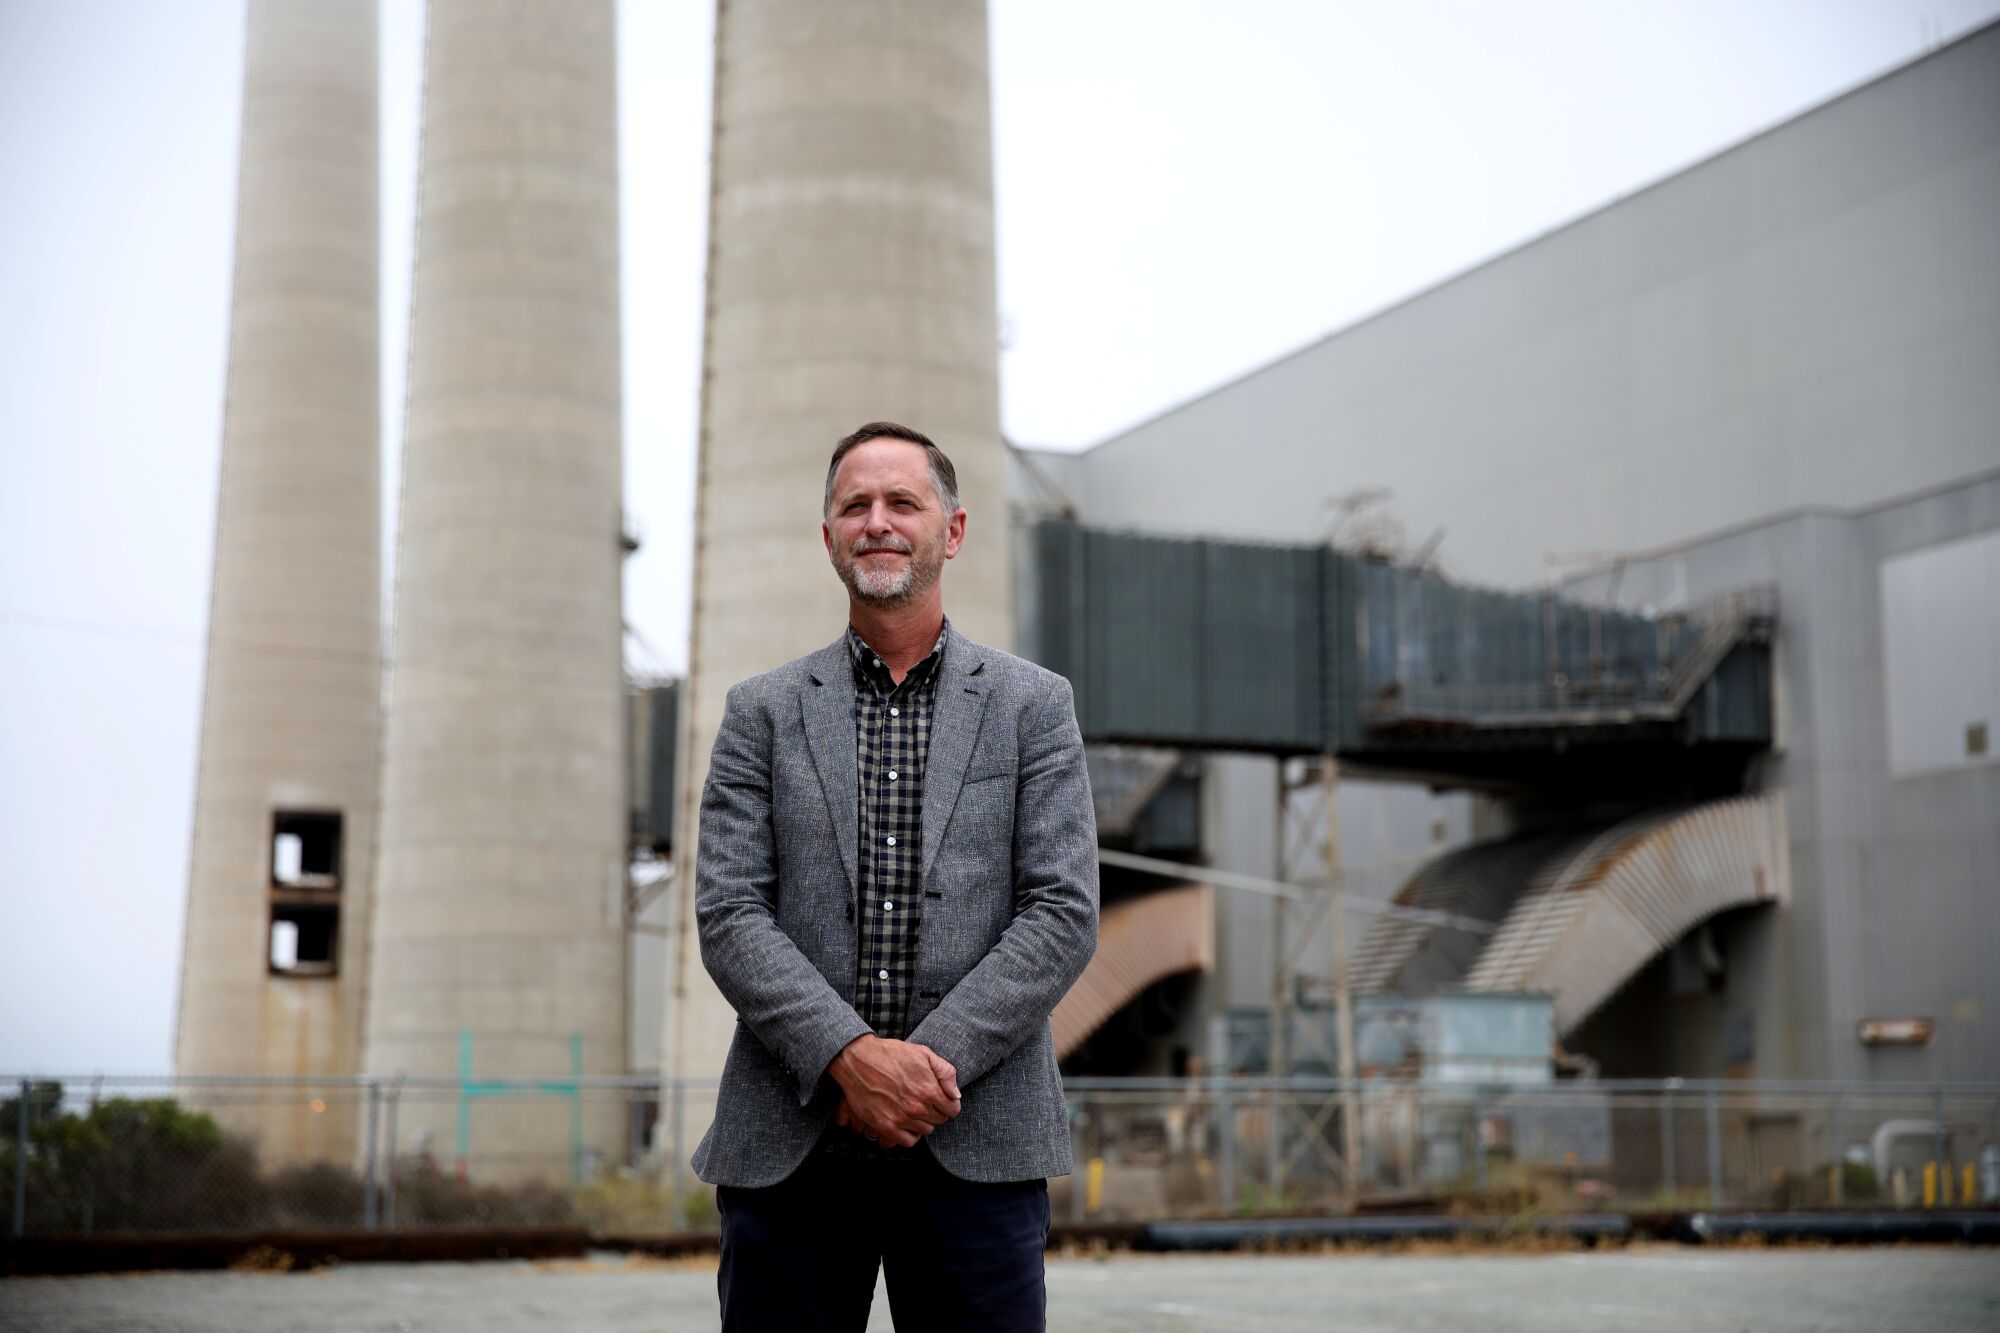 A man stands in front of a power plant's three smokestacks